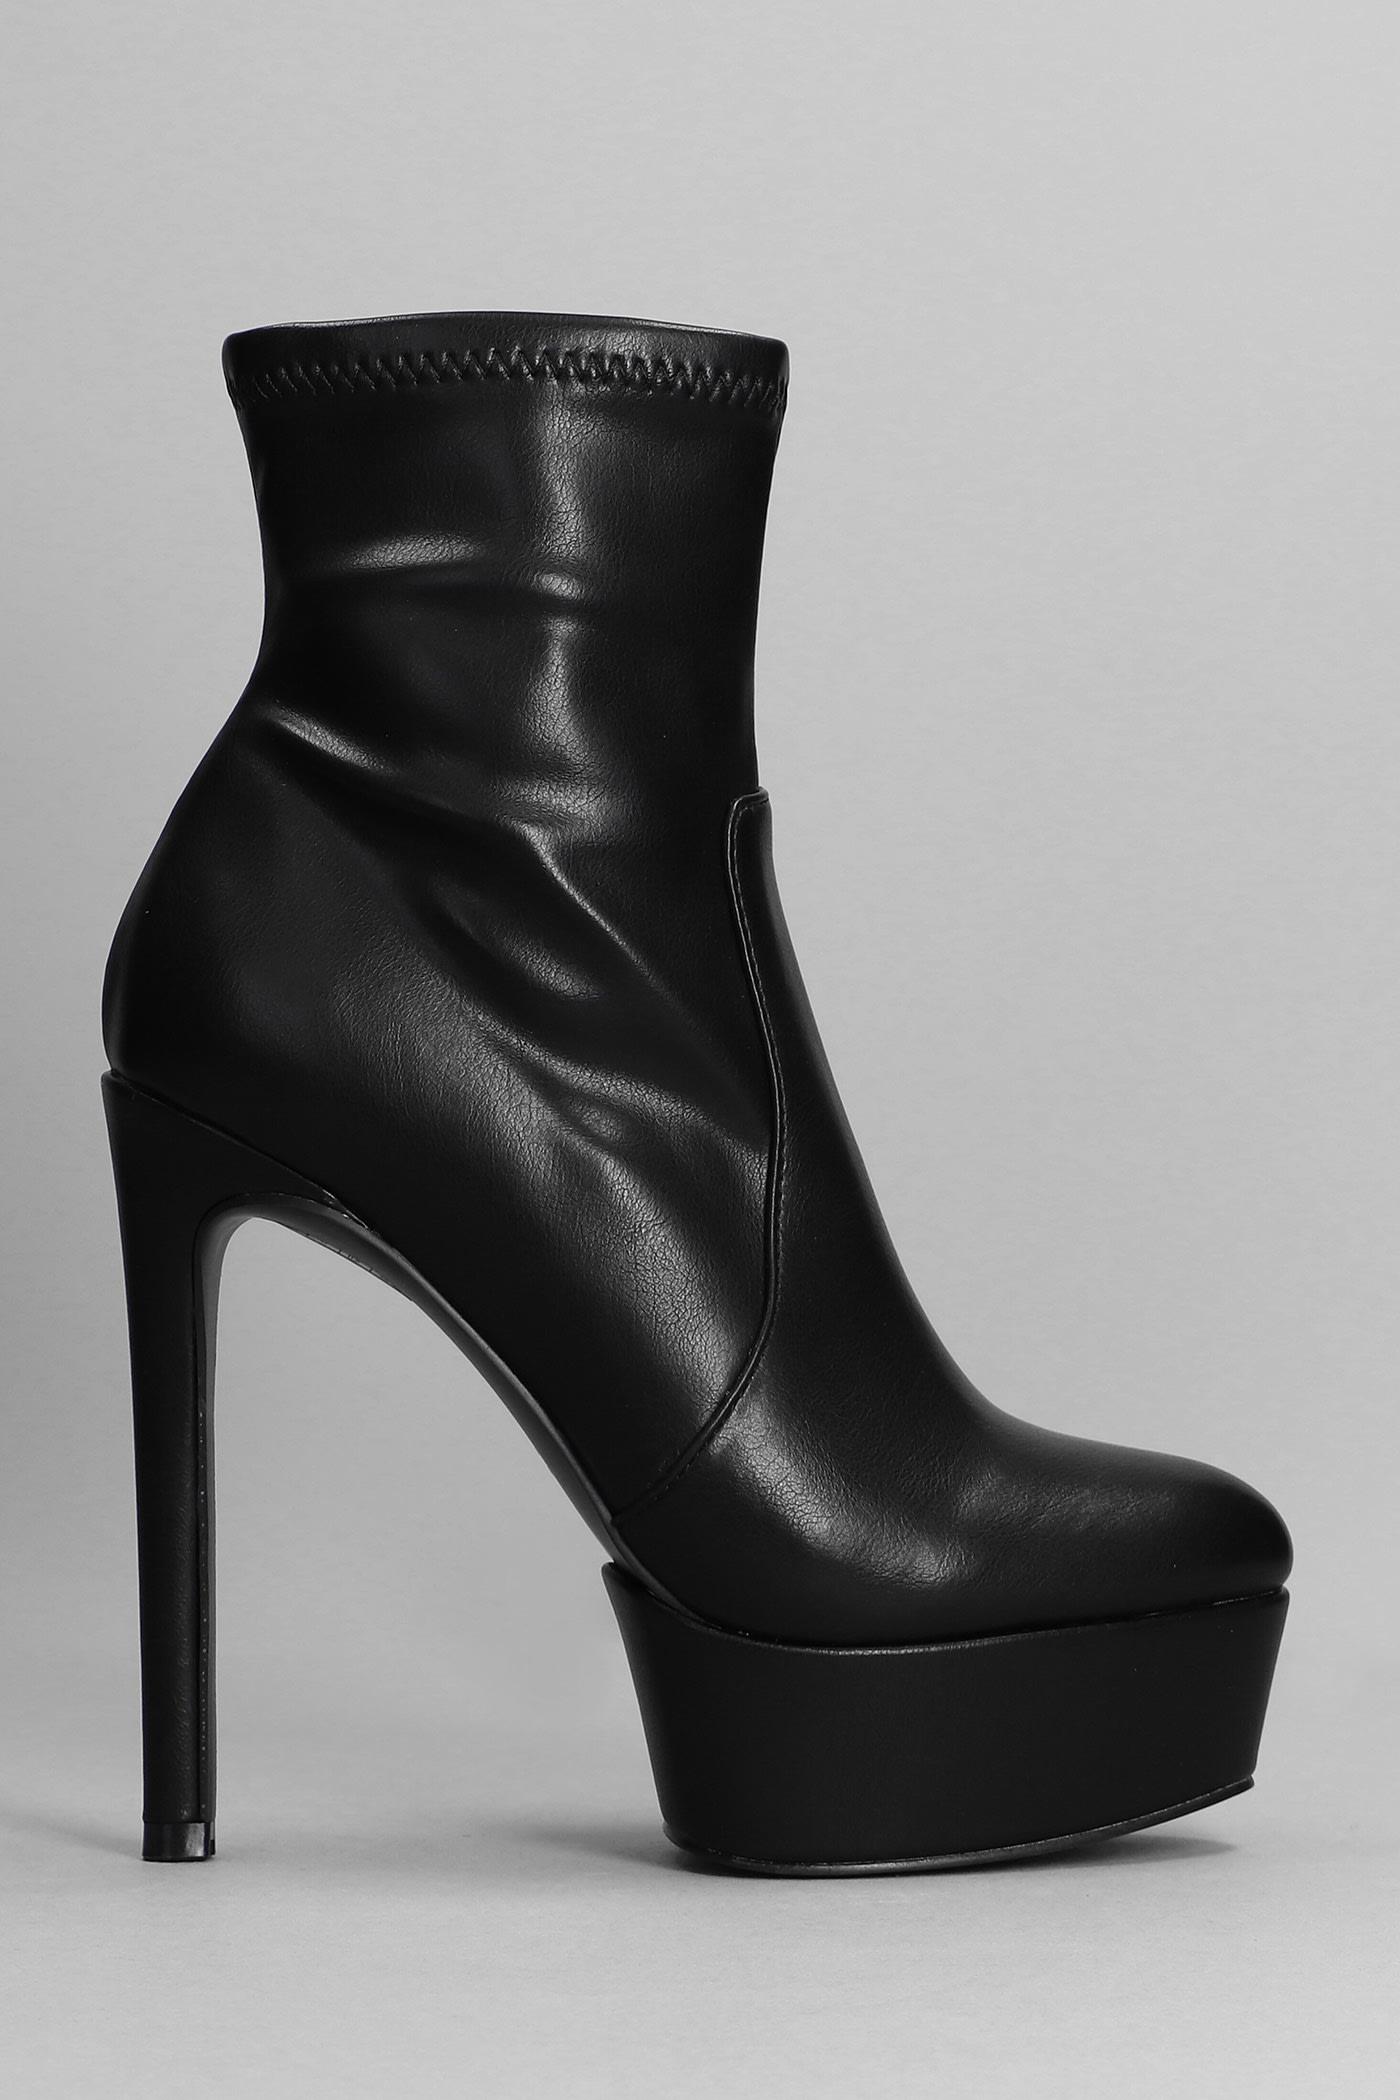 Steve Madden Tactical High Heels Ankle Boots In Black Leather